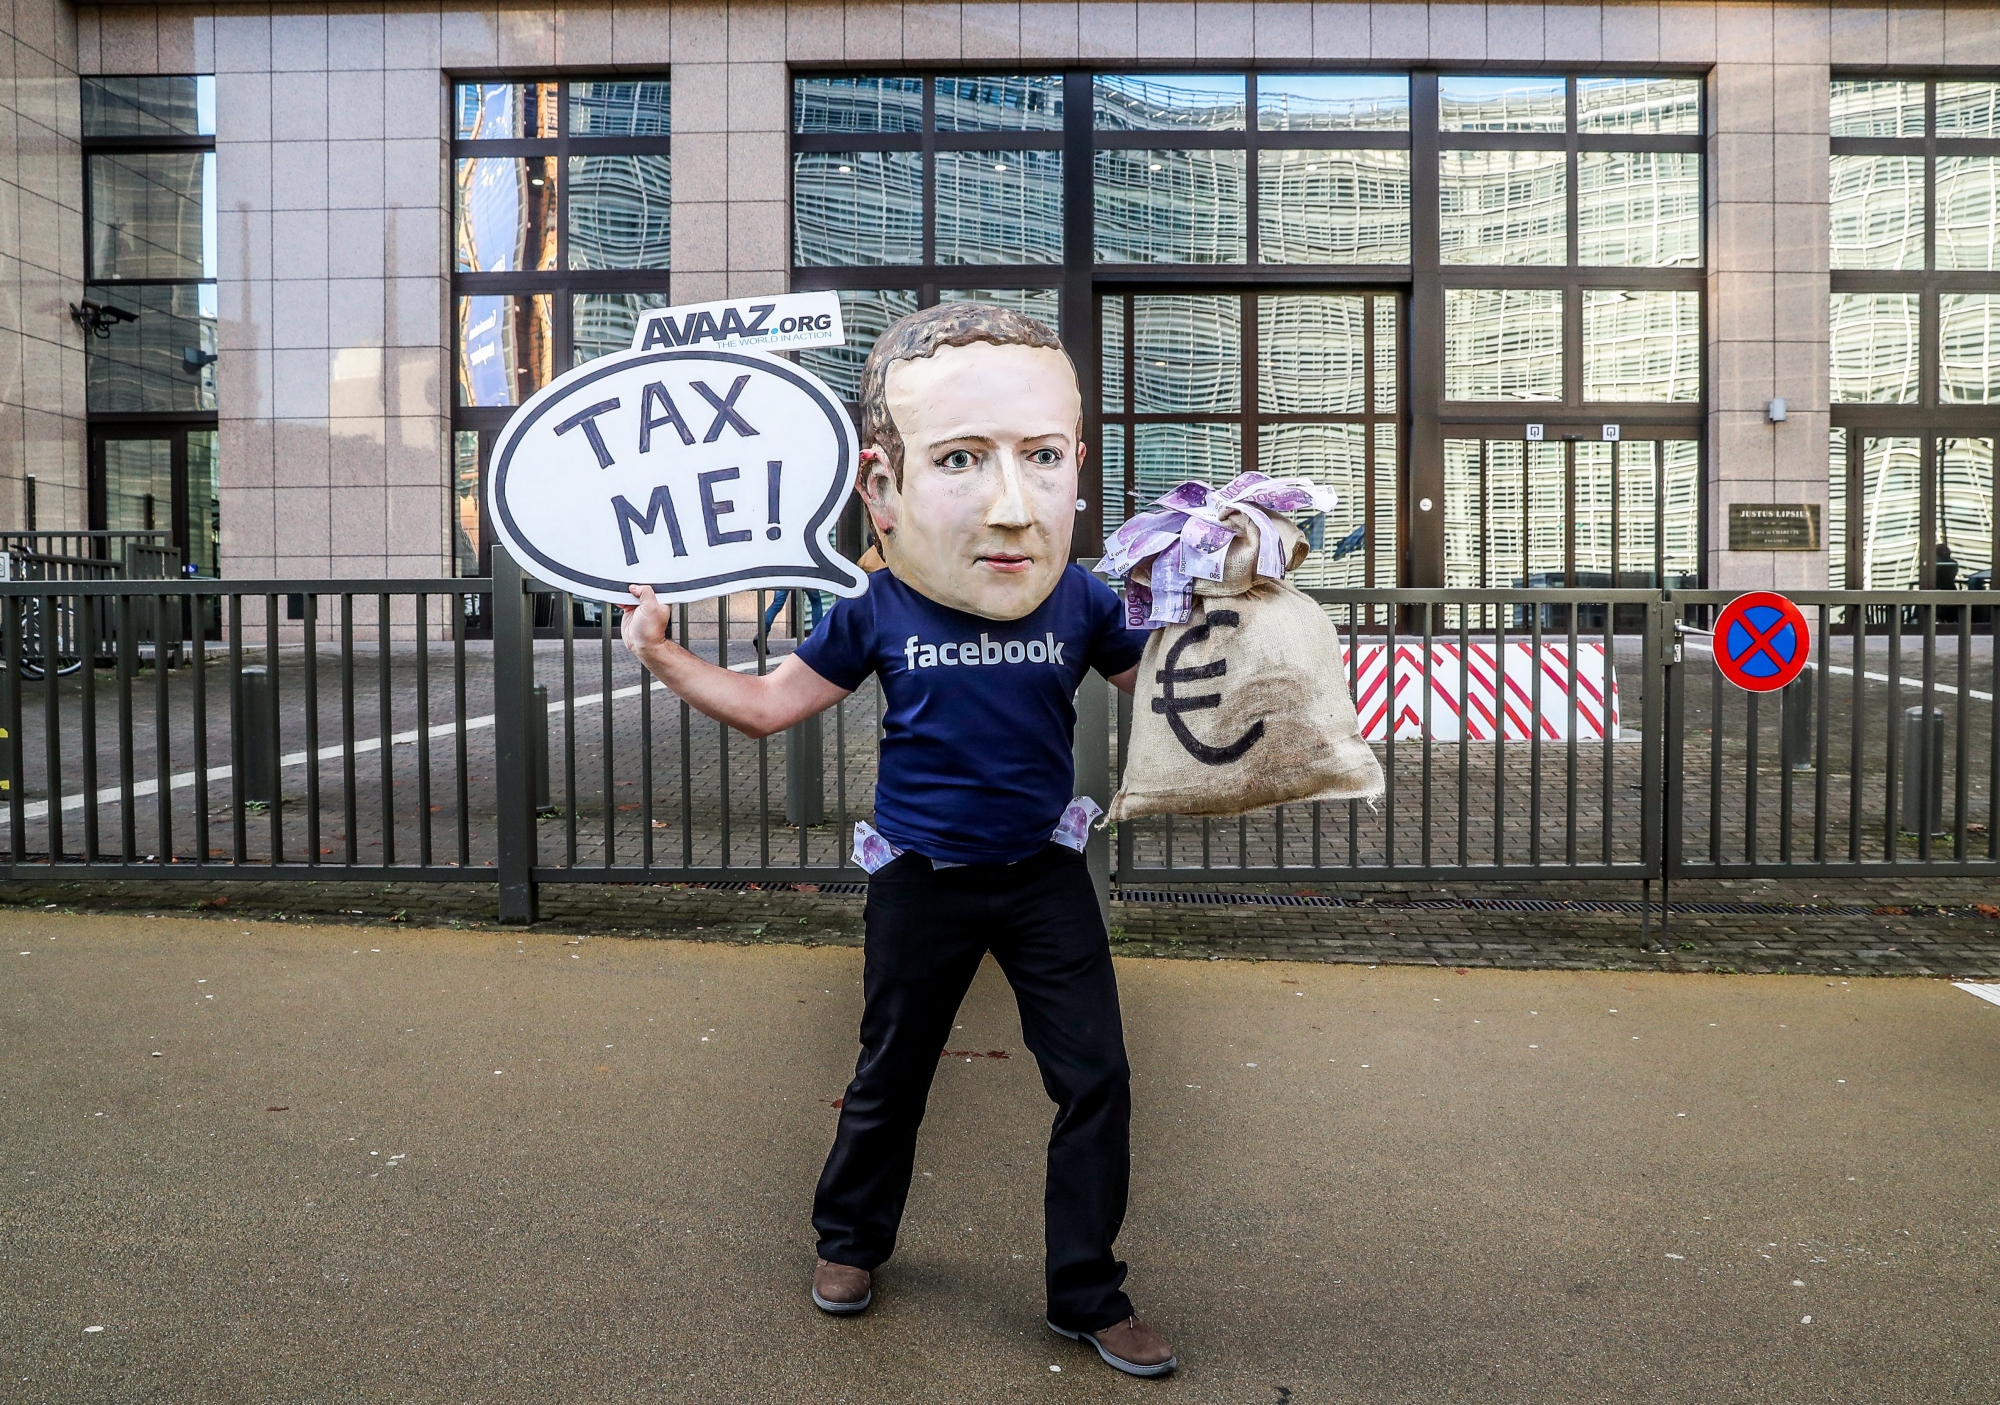 epa07207690 An activist wearing a mask depicting Facebook's CEO Mark Zuckerberg holds a banner reading 'Tax me' at the start of an European Union Finance Ministers Meeting in front of the European Council in Brussels, Belgium, 04 December 2018. Activists ask for an EU tax on big digital firms.  EPA/STEPHANIE LECOCQ BELGIUM EU DIGITAL TAX